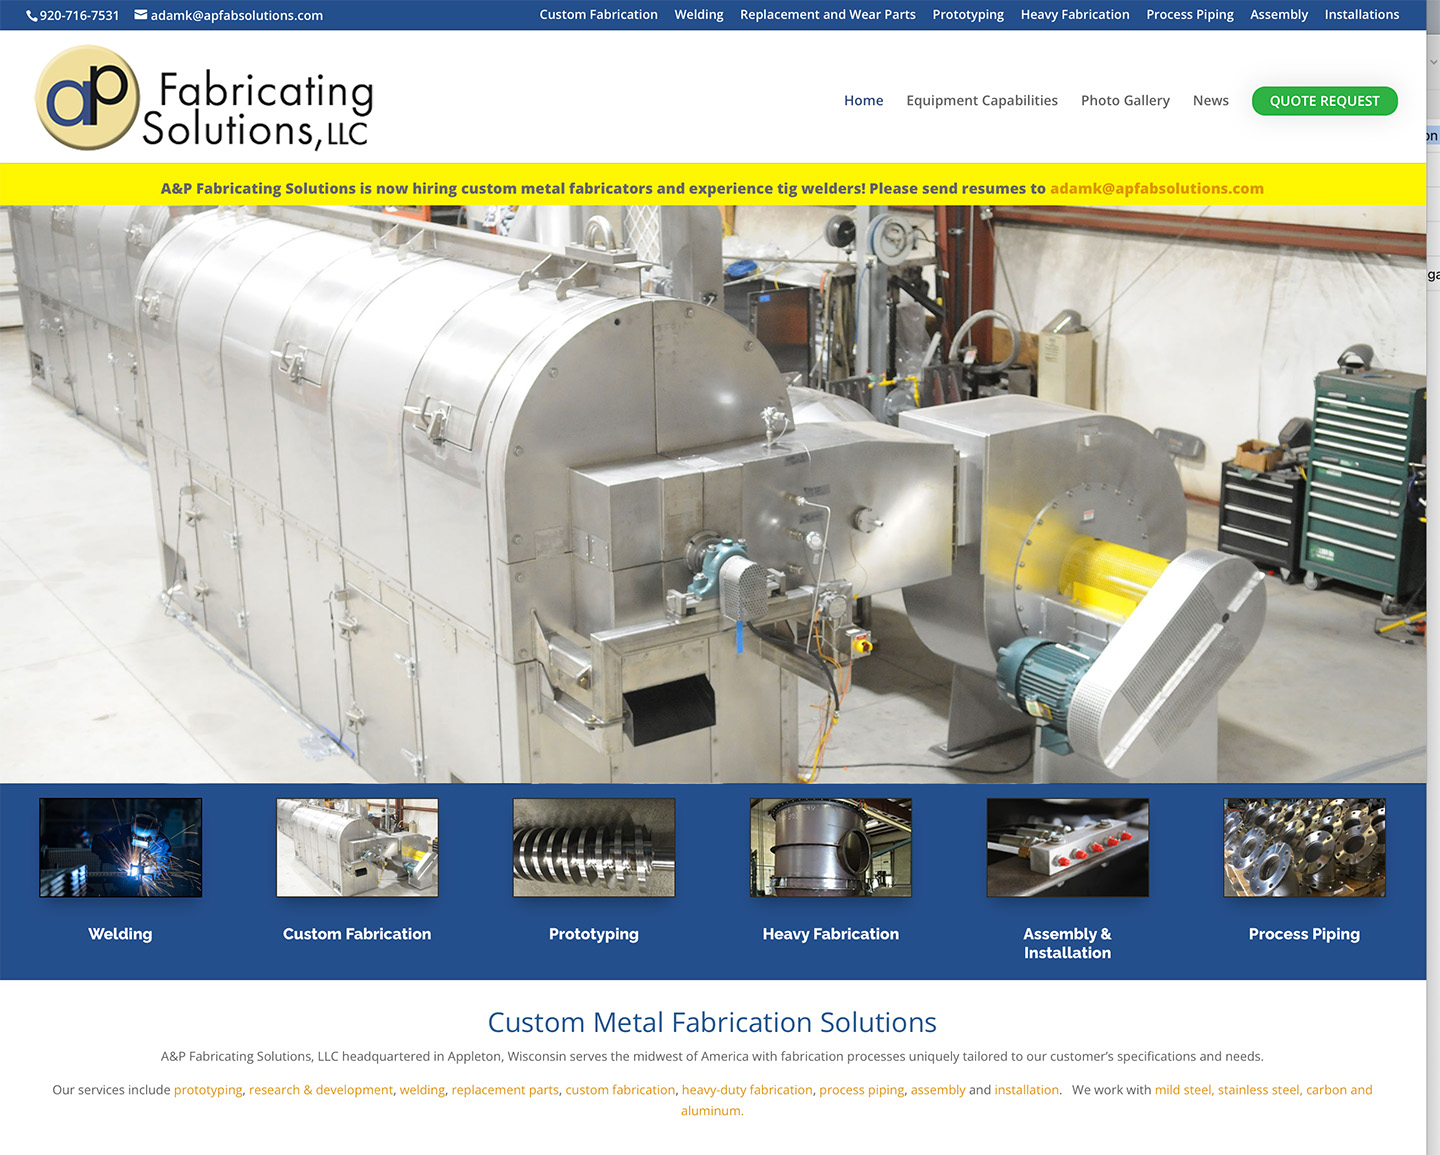 A&P Fabricating Solutions, LLC headquartered in Appleton, Wisconsin